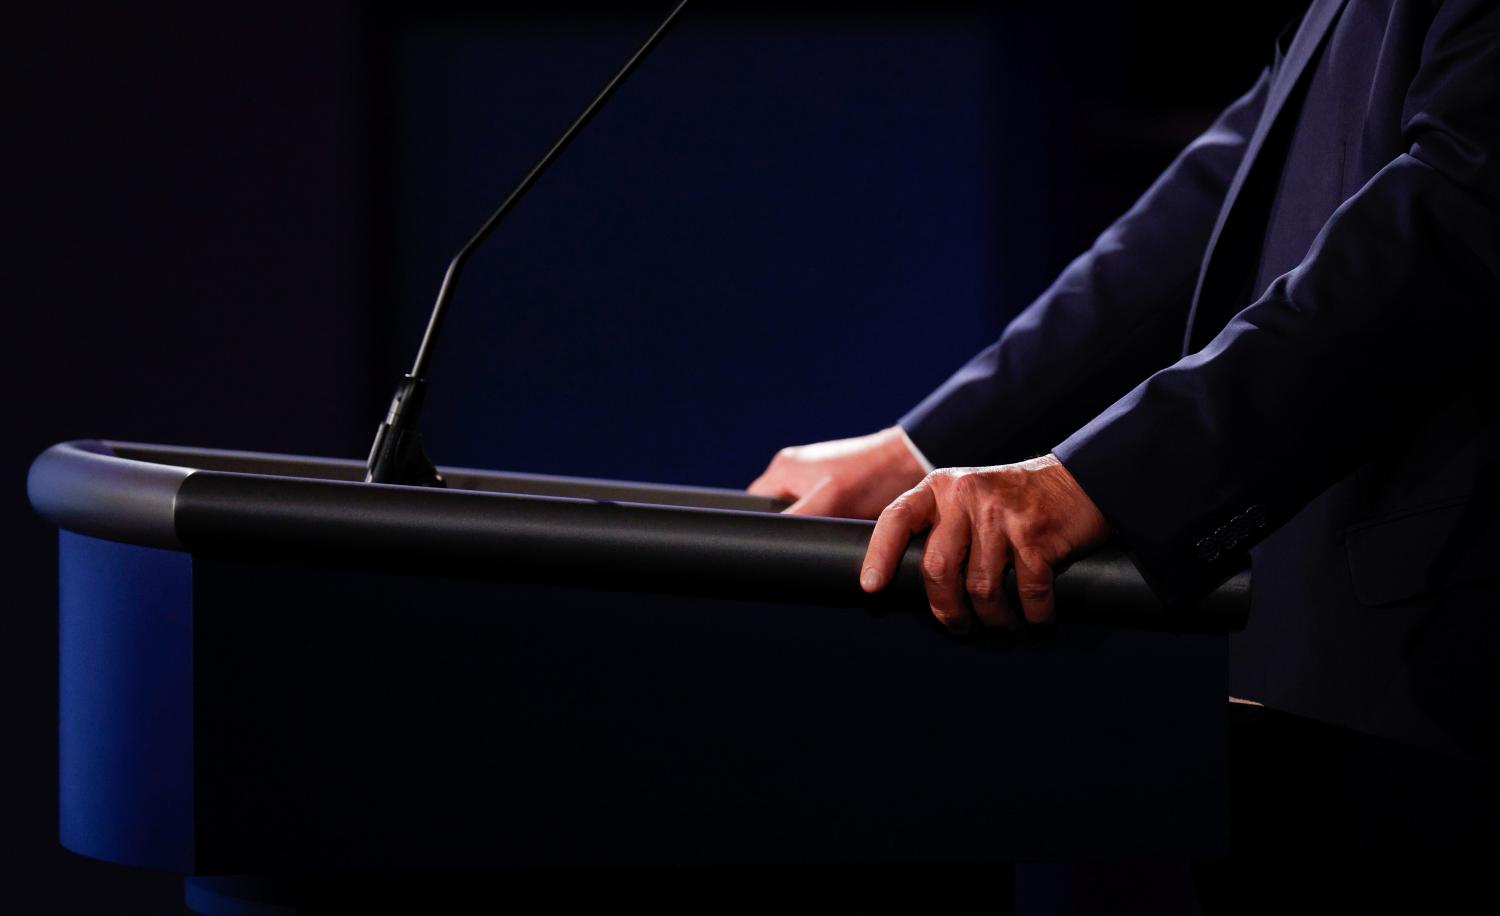 President Donald Trump grips his podium as he participates in the first 2020 presidential campaign debate with Democratic presidential nominee Joe Biden held on the campus of the Cleveland Clinic at Case Western Reserve University in Cleveland, Ohio, U.S., September 29, 2020. REUTERS/Brian Snyder